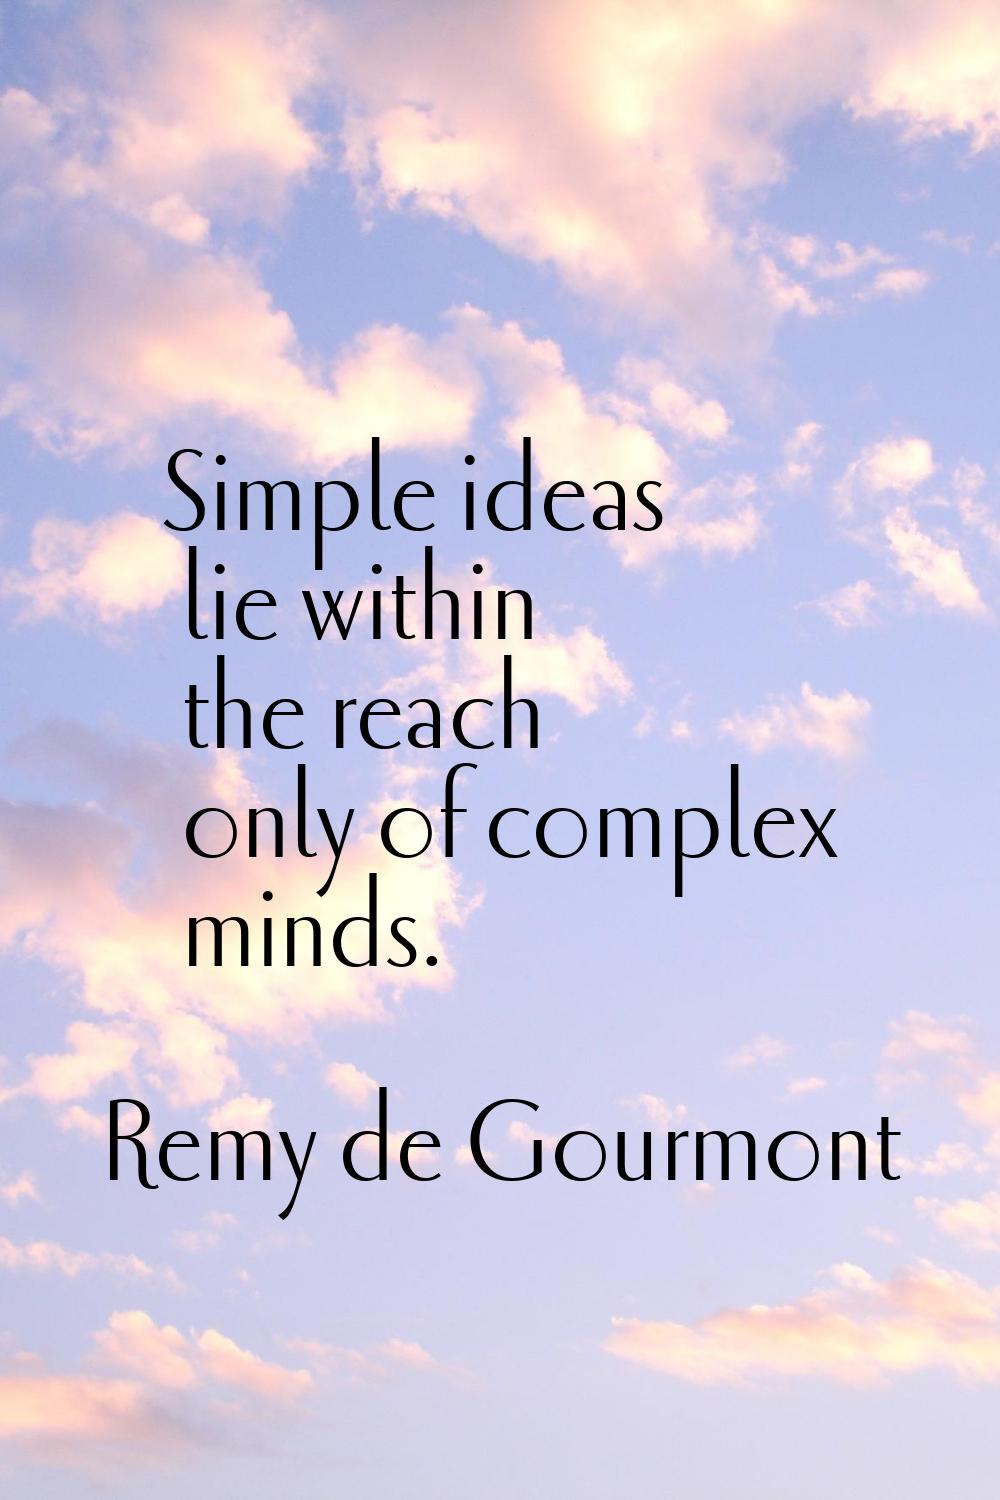 Simple ideas lie within the reach only of complex minds.